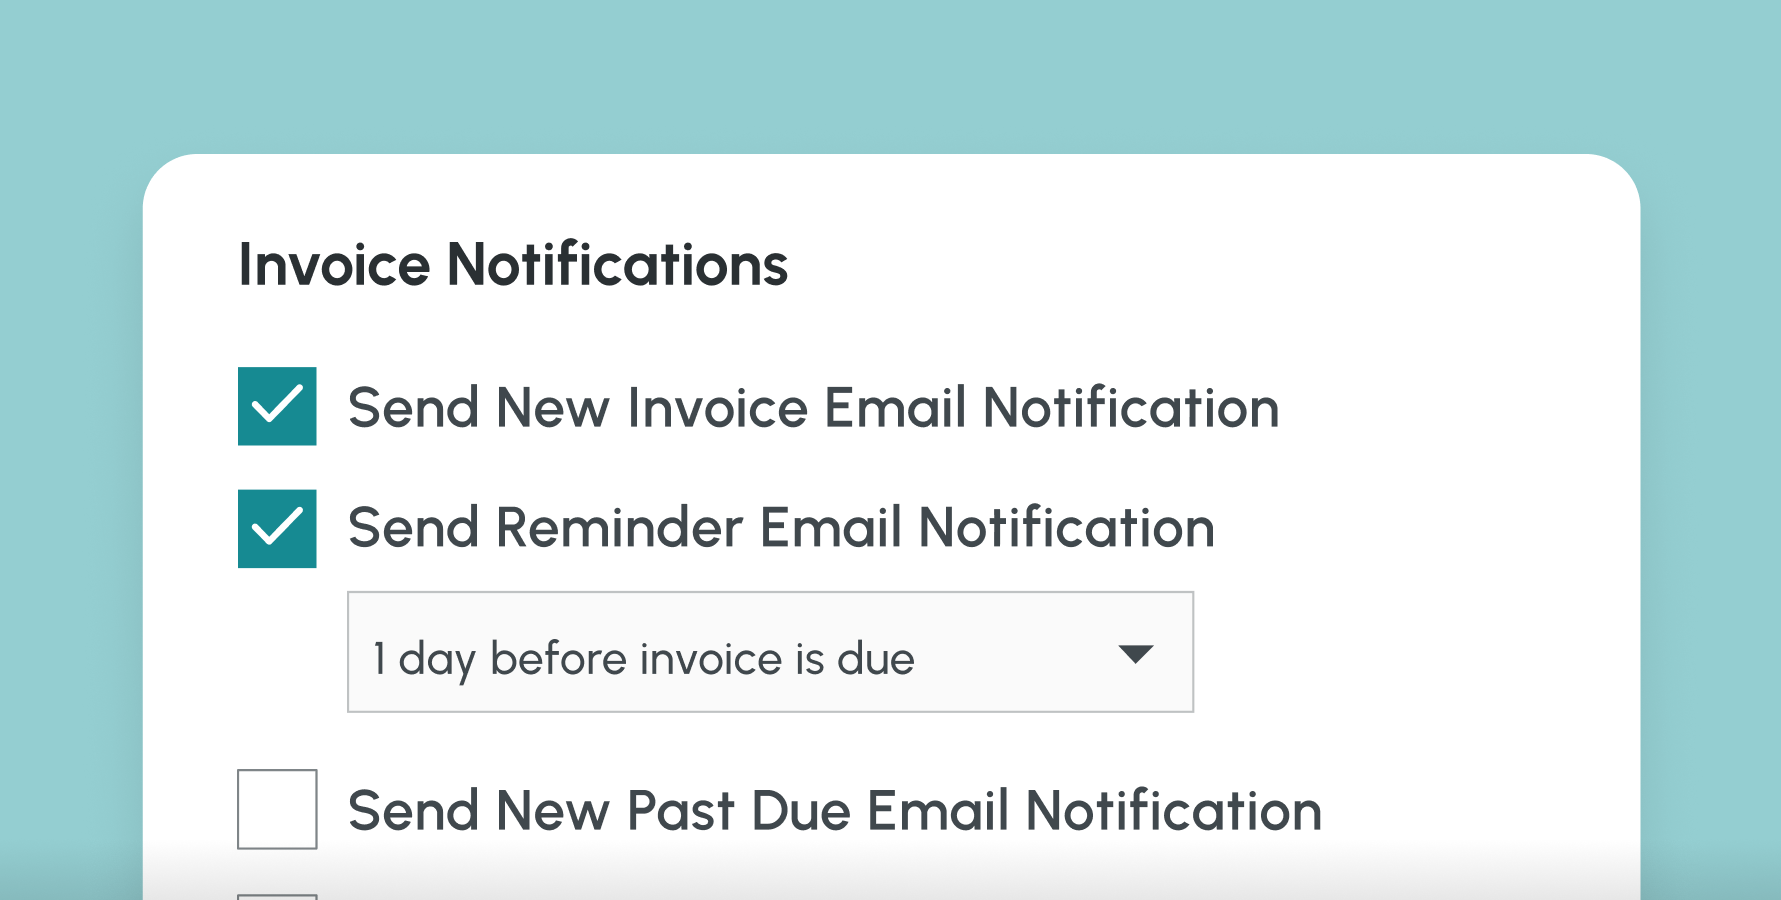 Automated invoices